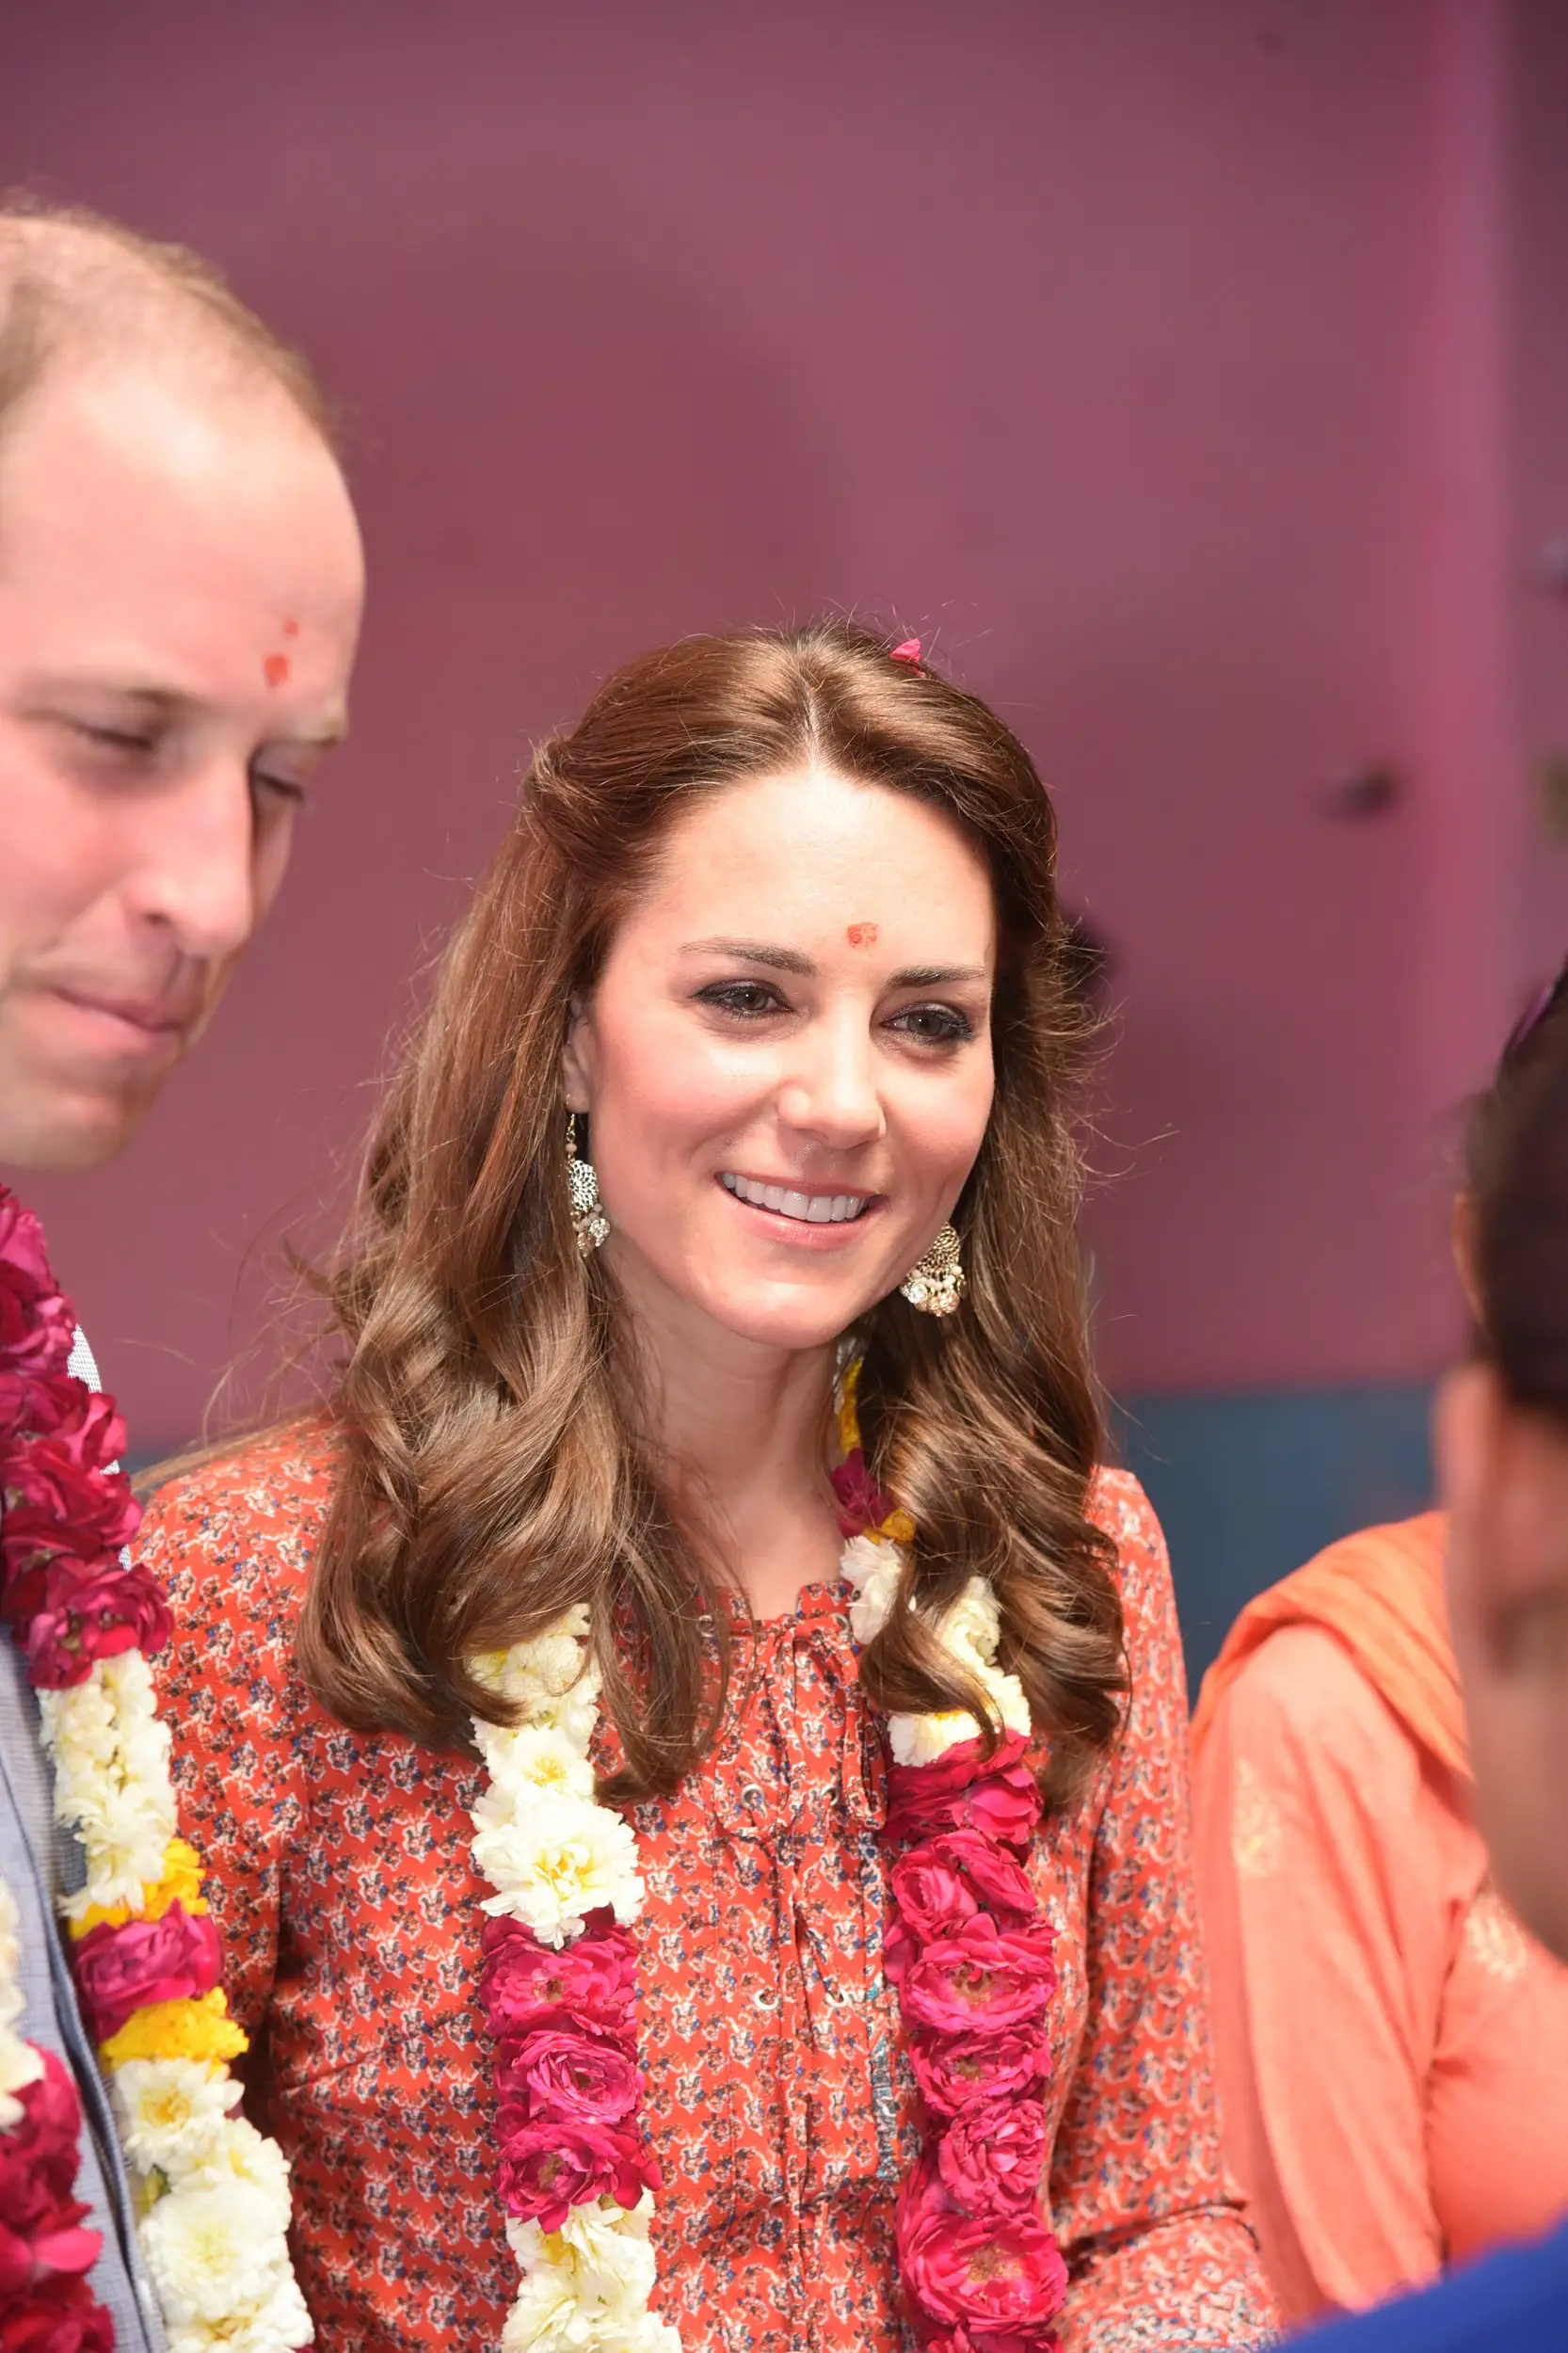 The Duke and Duchess first visited the Trust’s Contact Centre near New Delhi Railway Station